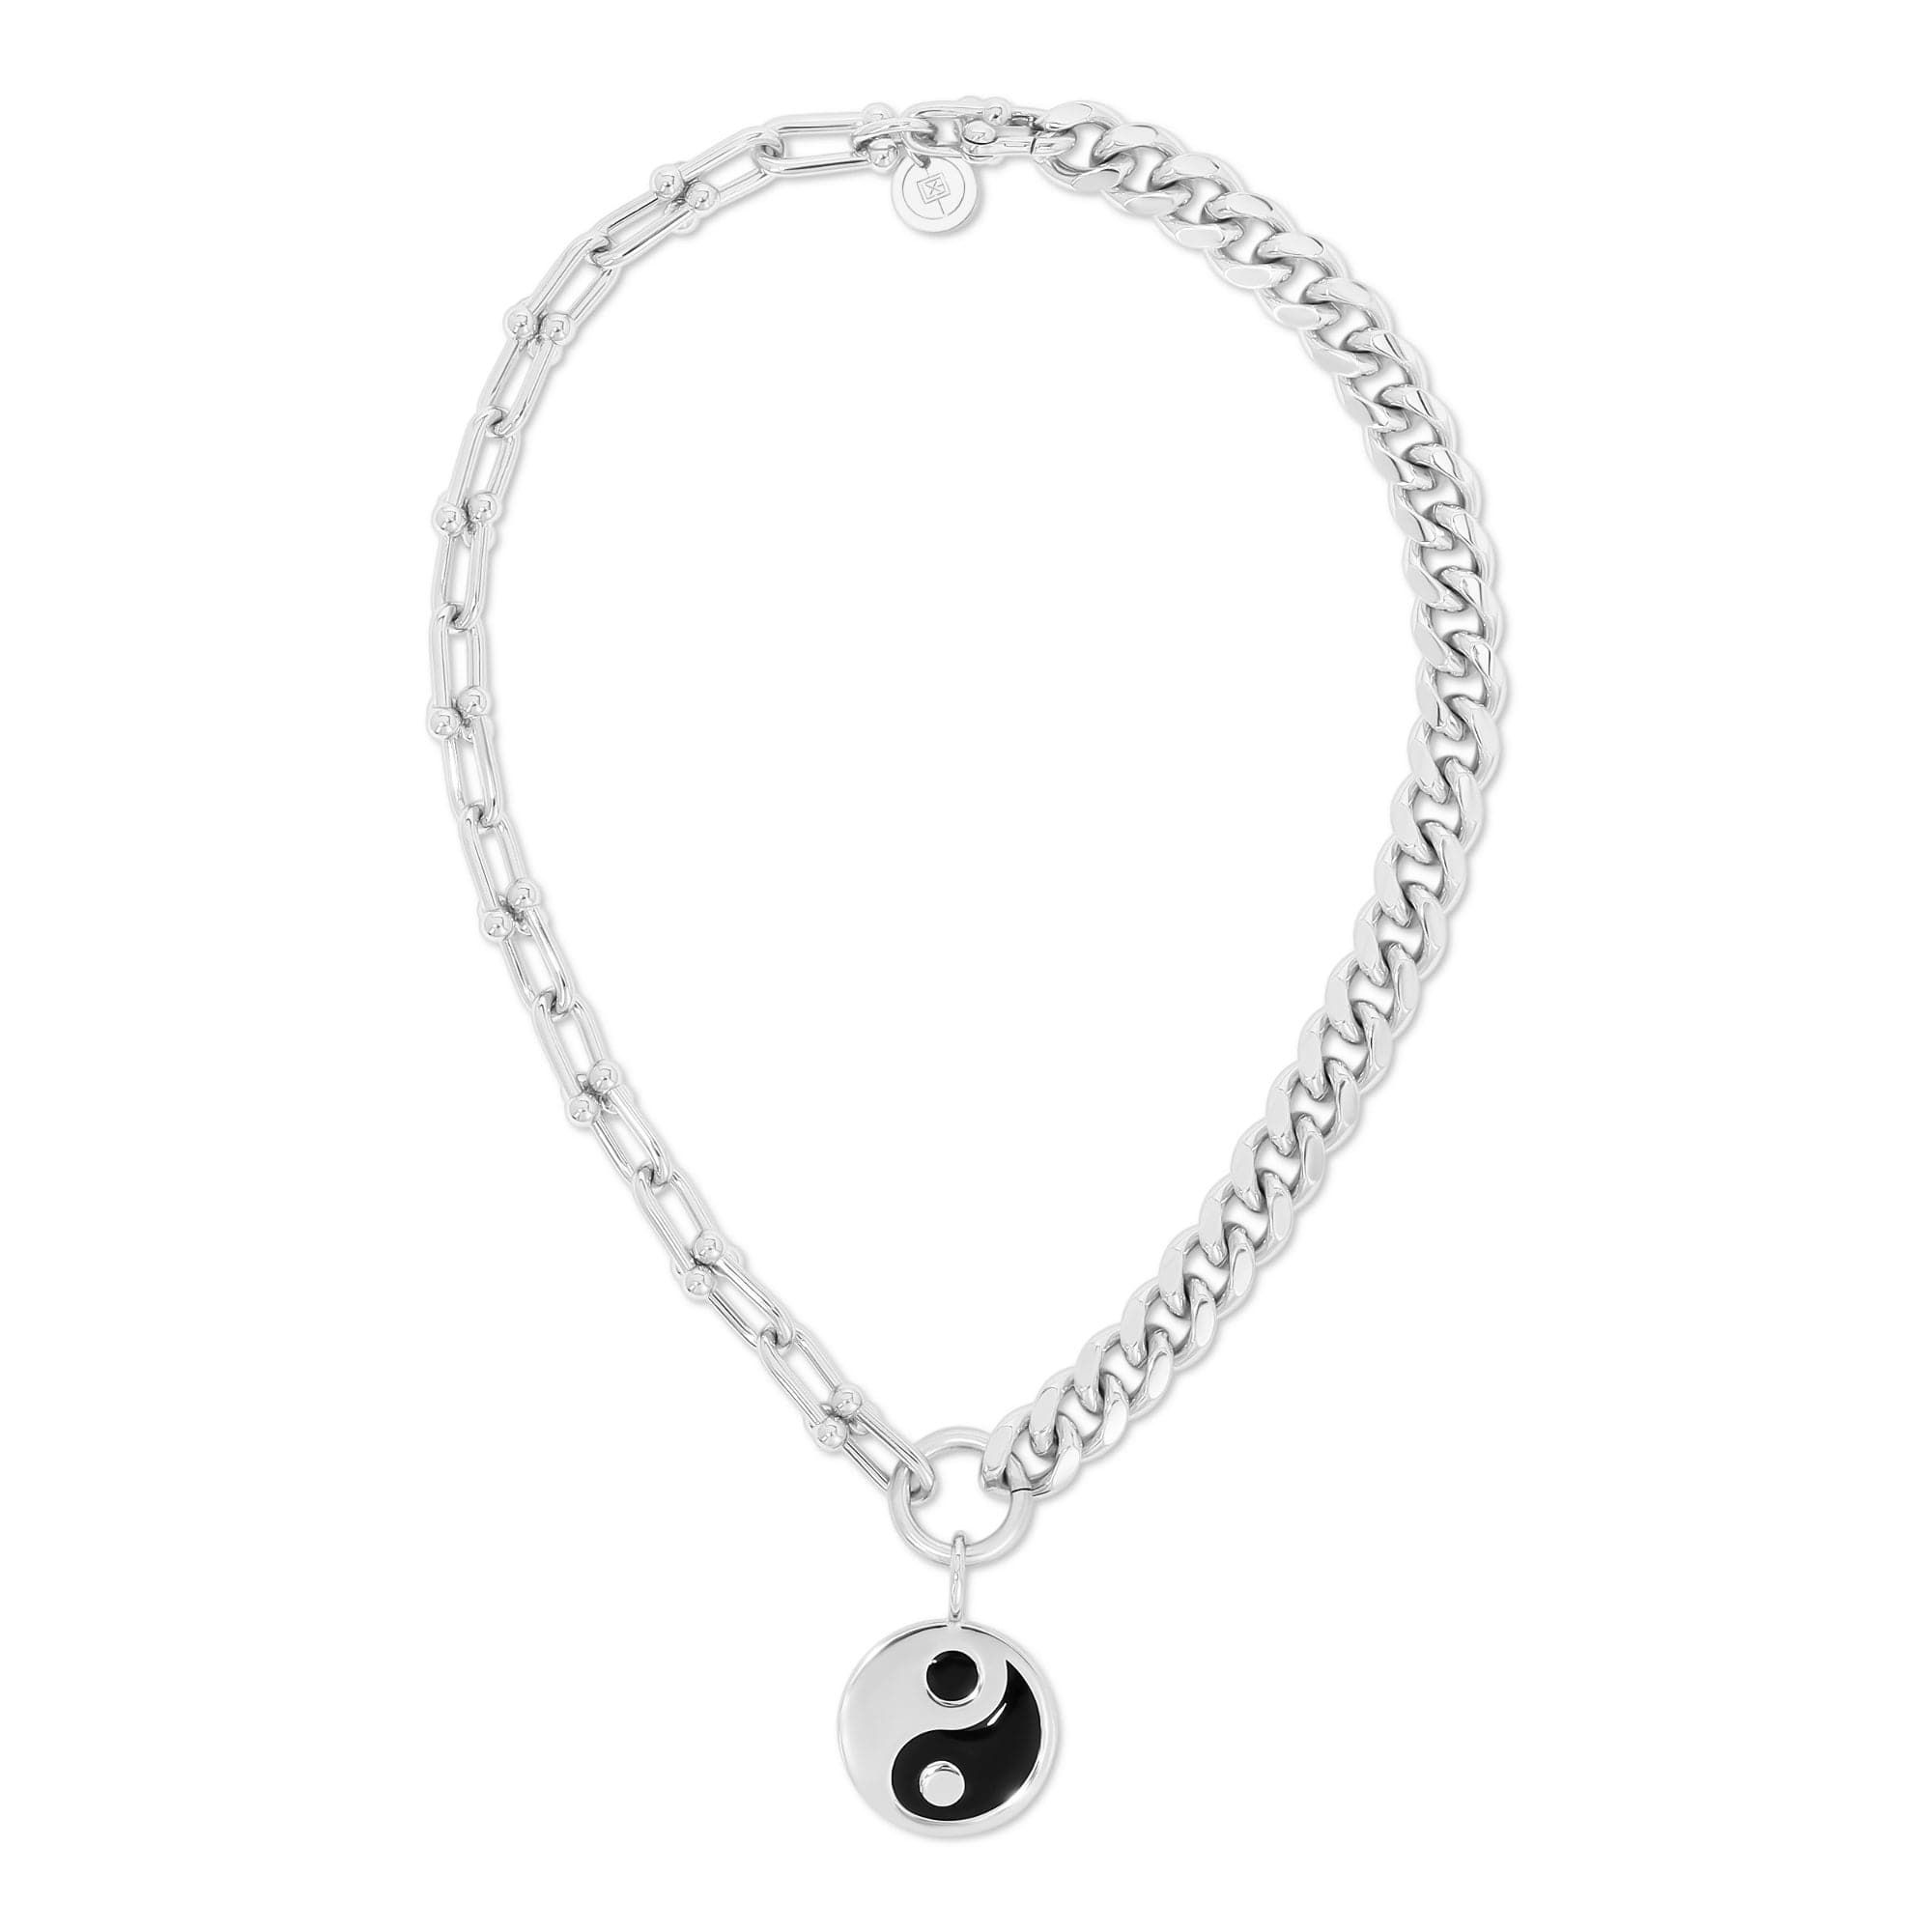 a silver chain bracelet with a yin symbol charm